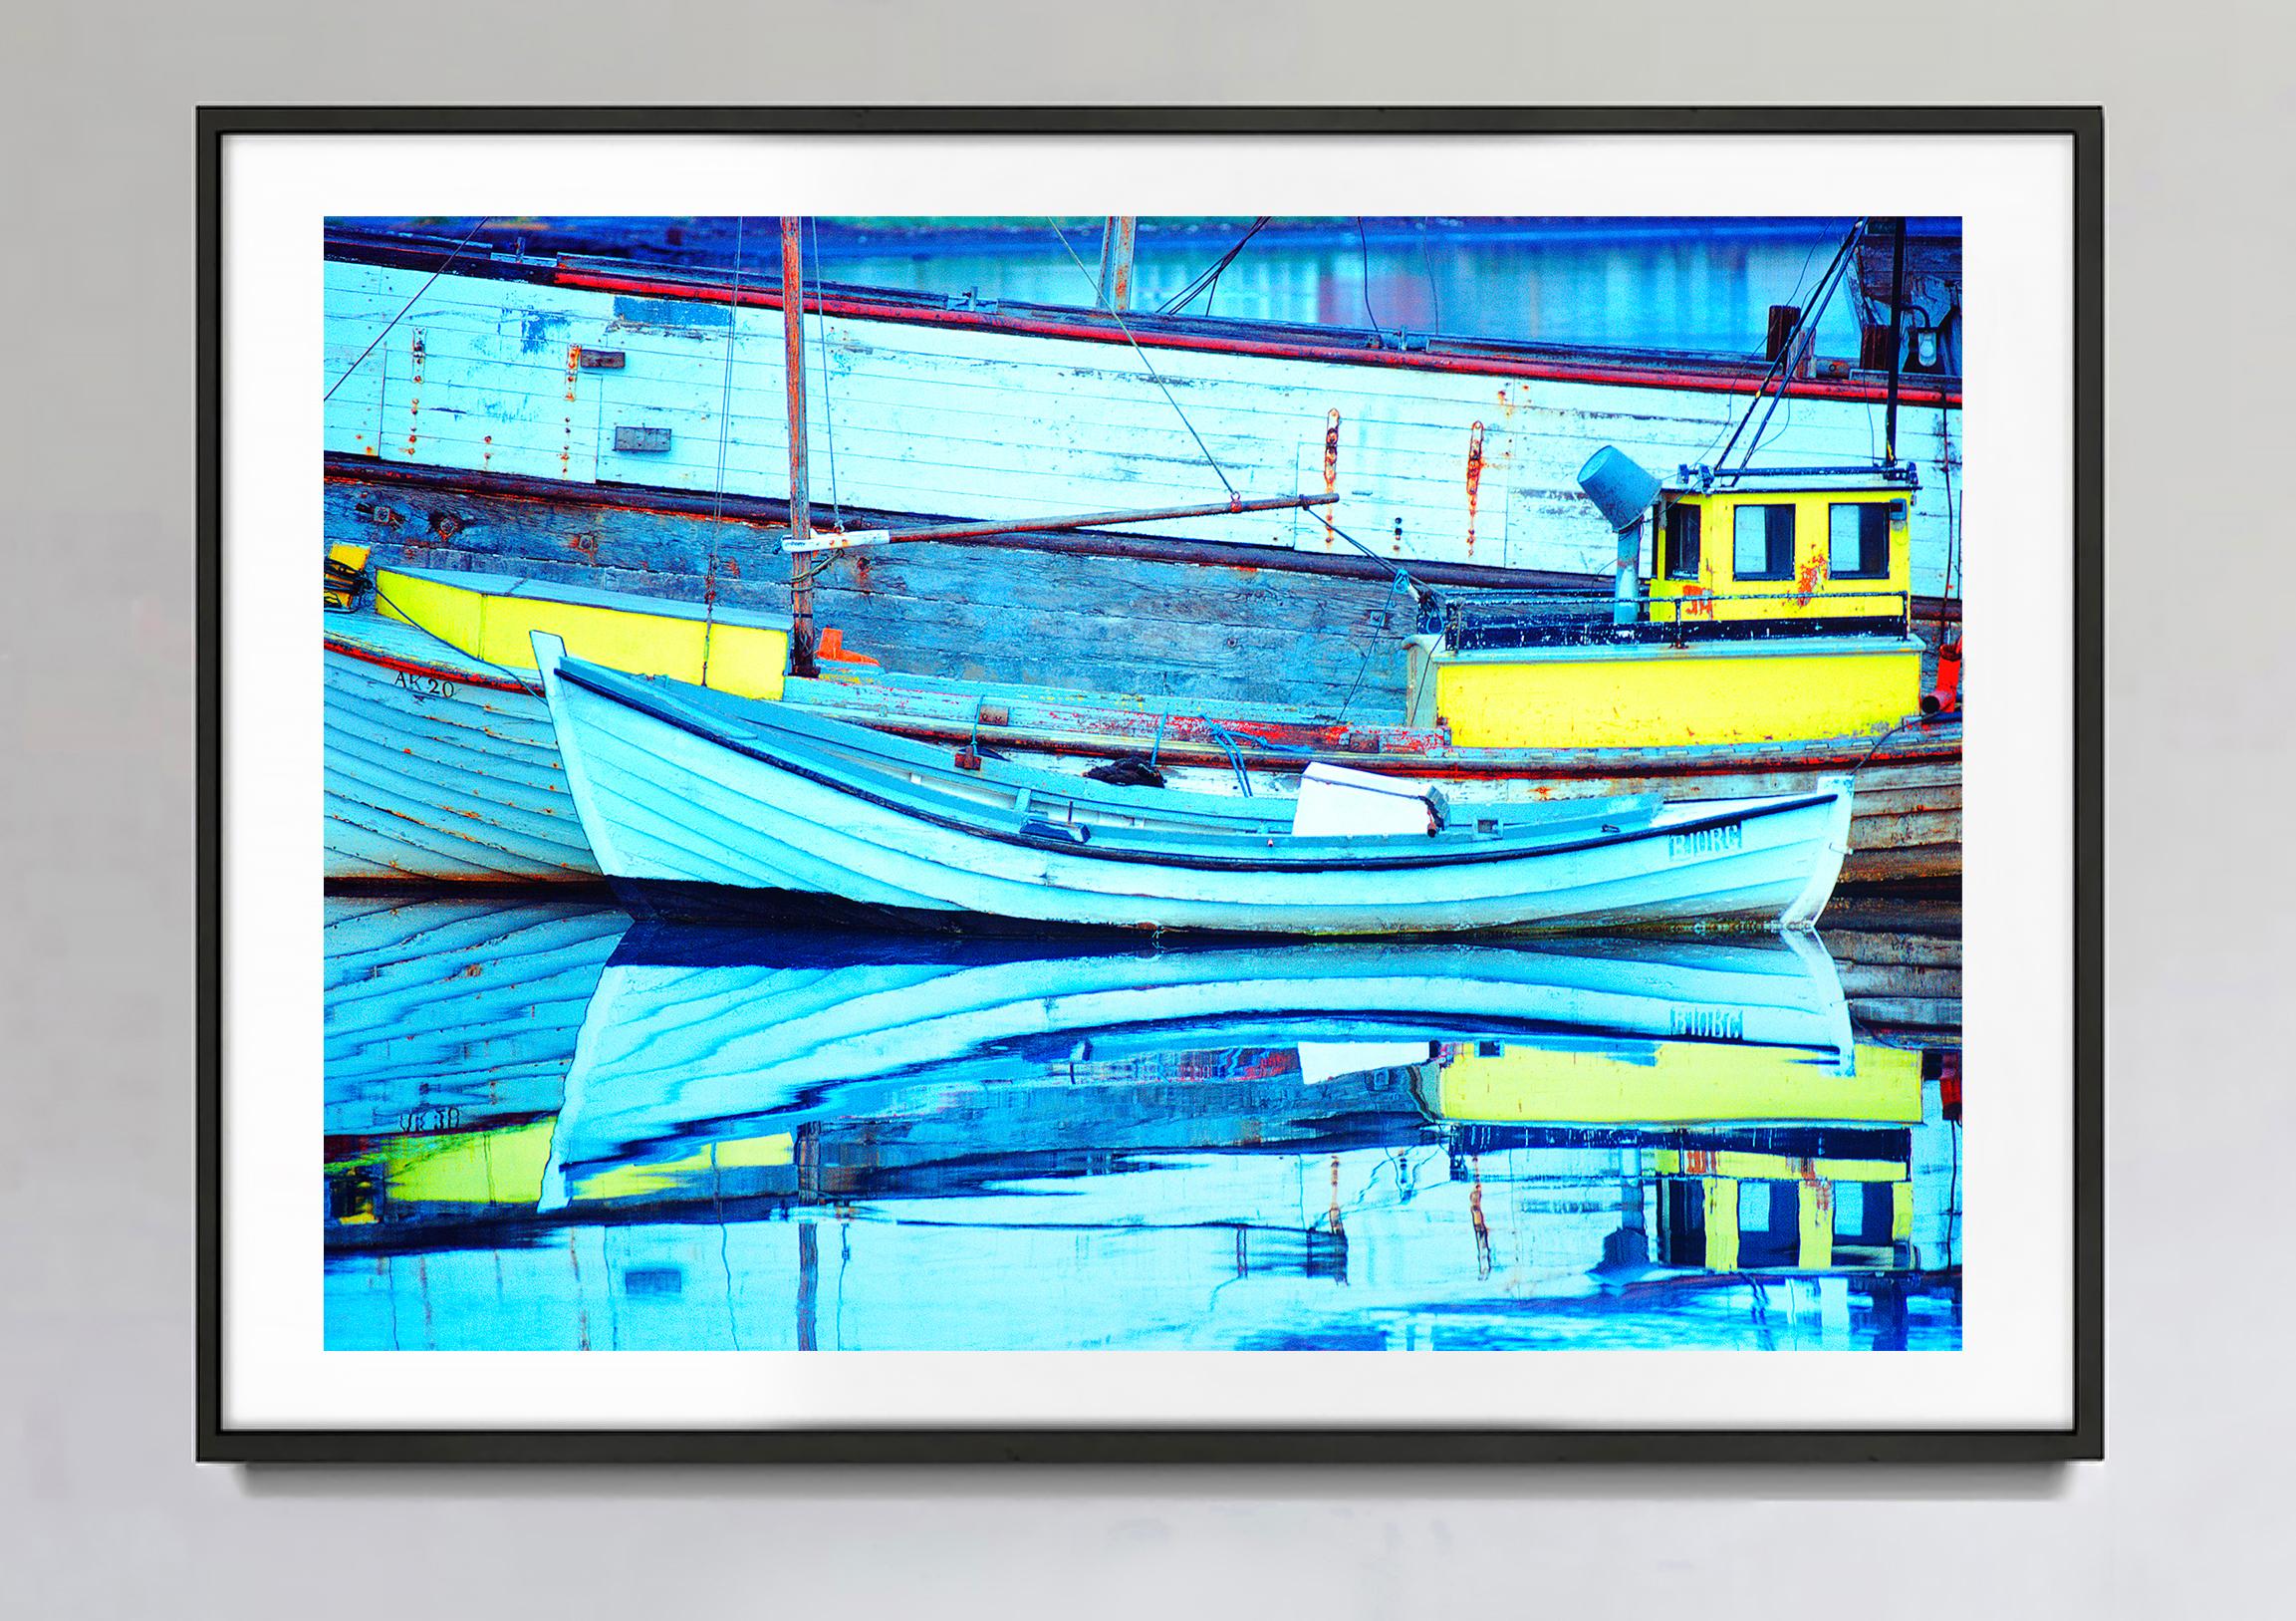 Old Boats In Iceland With Blue Reflections In Water, Abstract - Photograph by Mitchell Funk